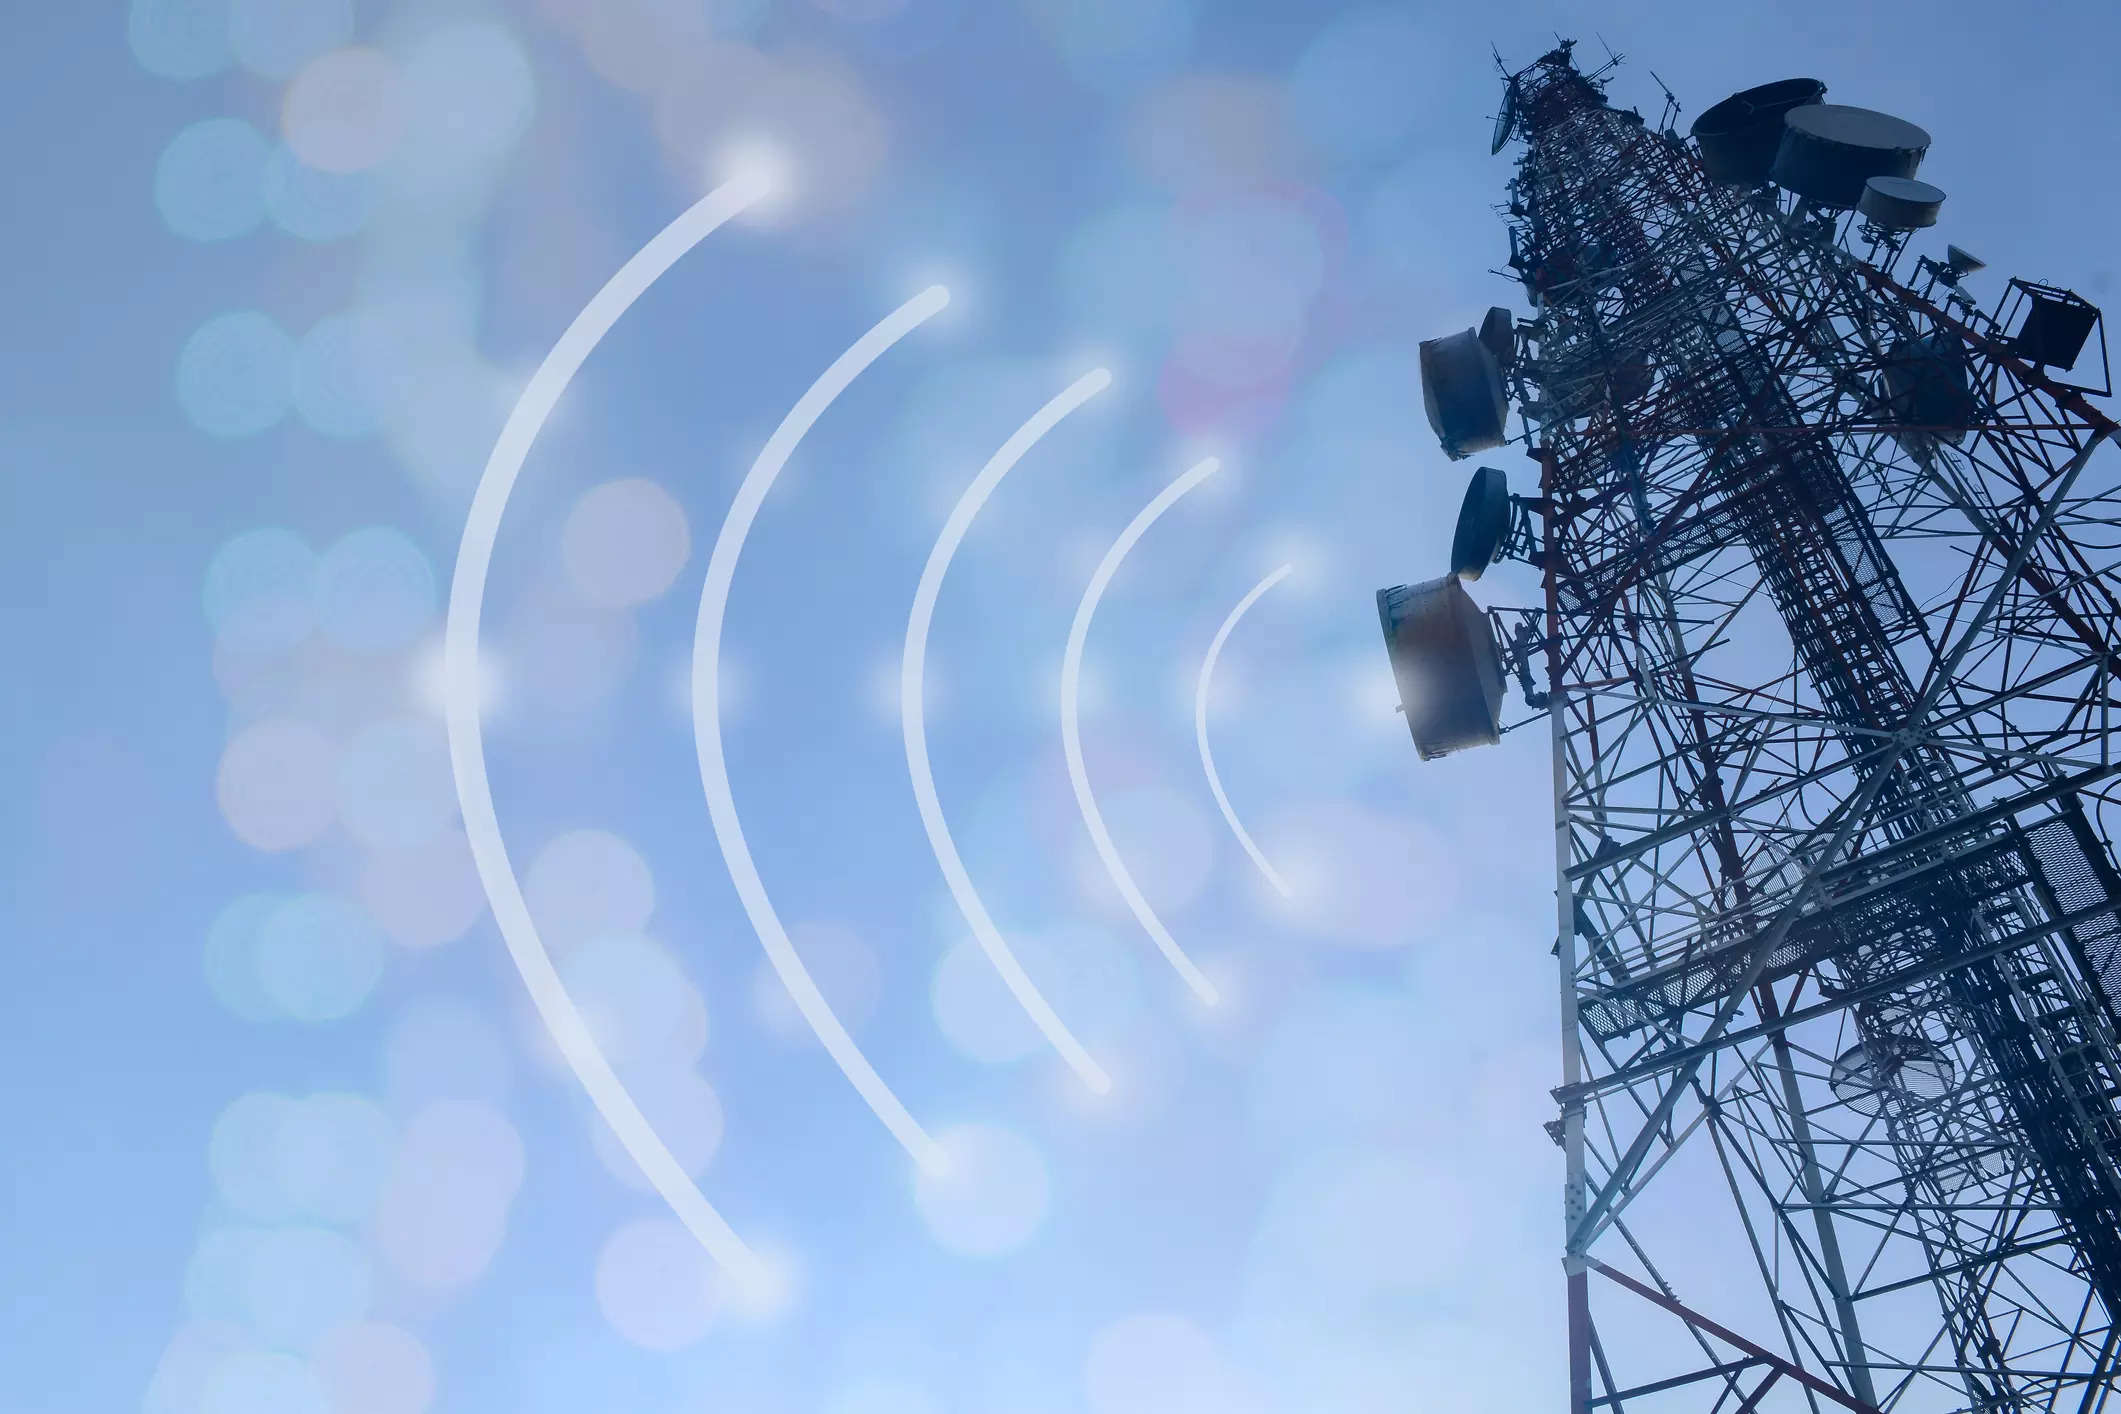 <p>TRAI has released a consultation paper on 'Auction of Spectrum in 37-37.5 GHz, 37.5-40 GHz and 42.5-43.5 GHz bands identified for IMT' on April 4.</p>